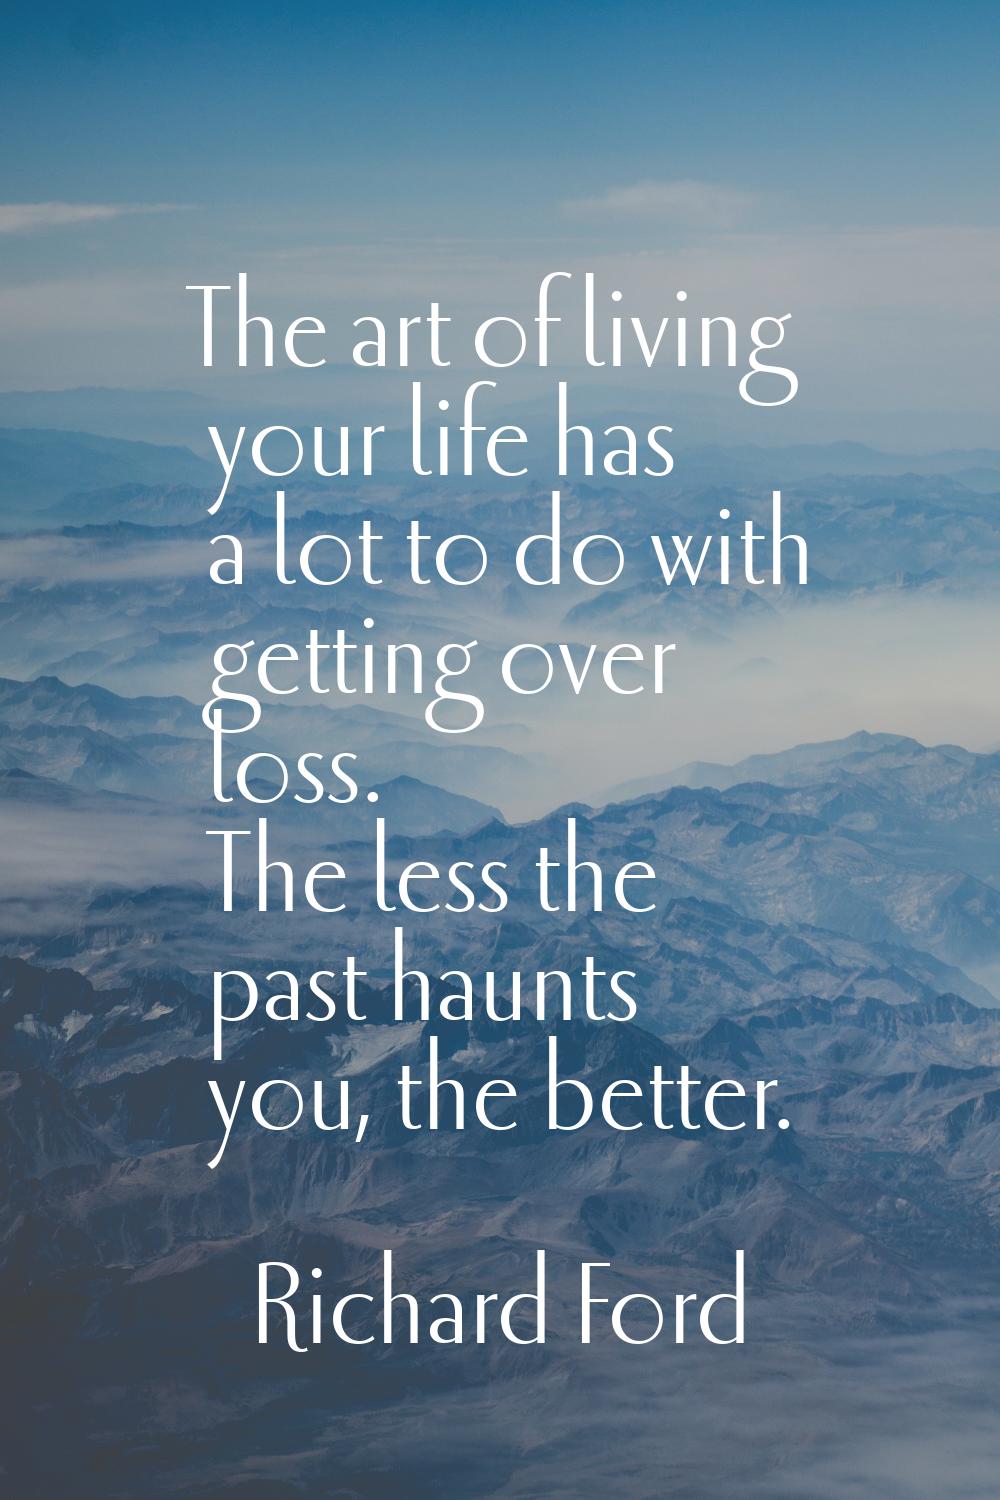 The art of living your life has a lot to do with getting over loss. The less the past haunts you, t